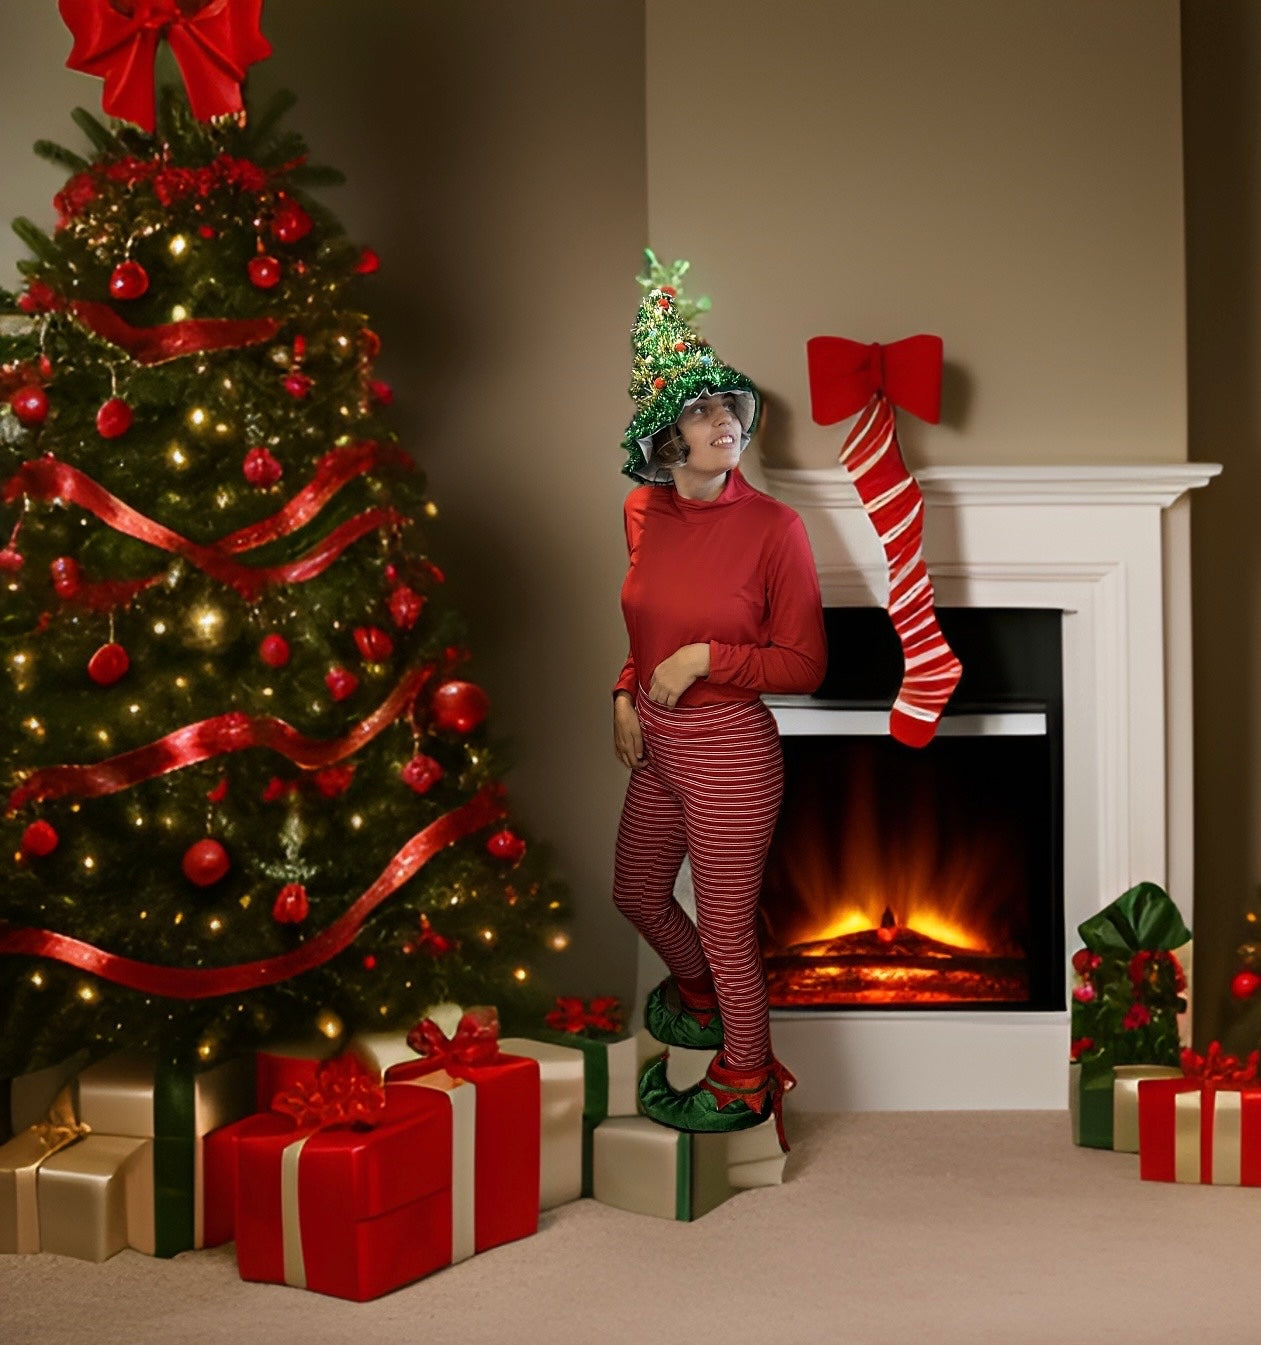 Woman in red pants and sweater poses by a festive Christmas tree